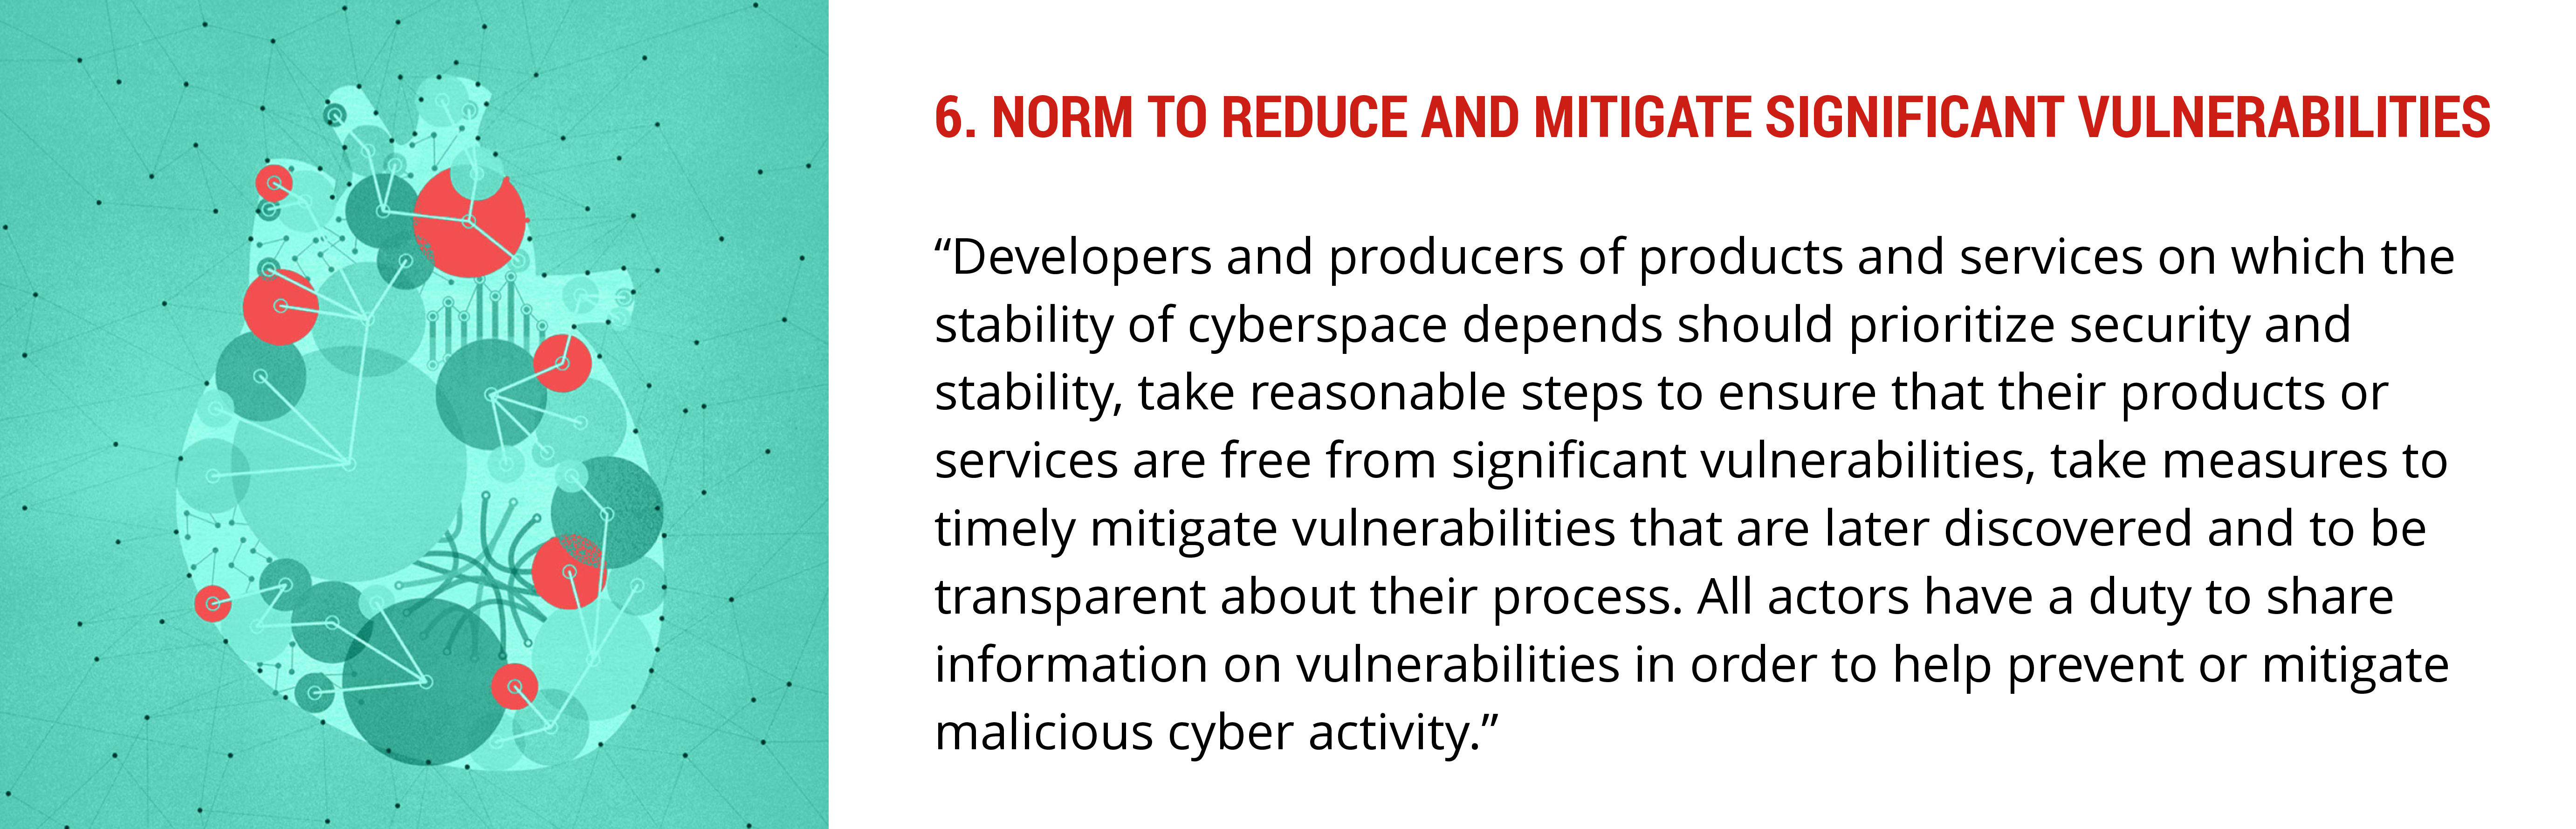 Norm to Reduce and Mitigate Significant Vulnerabilities